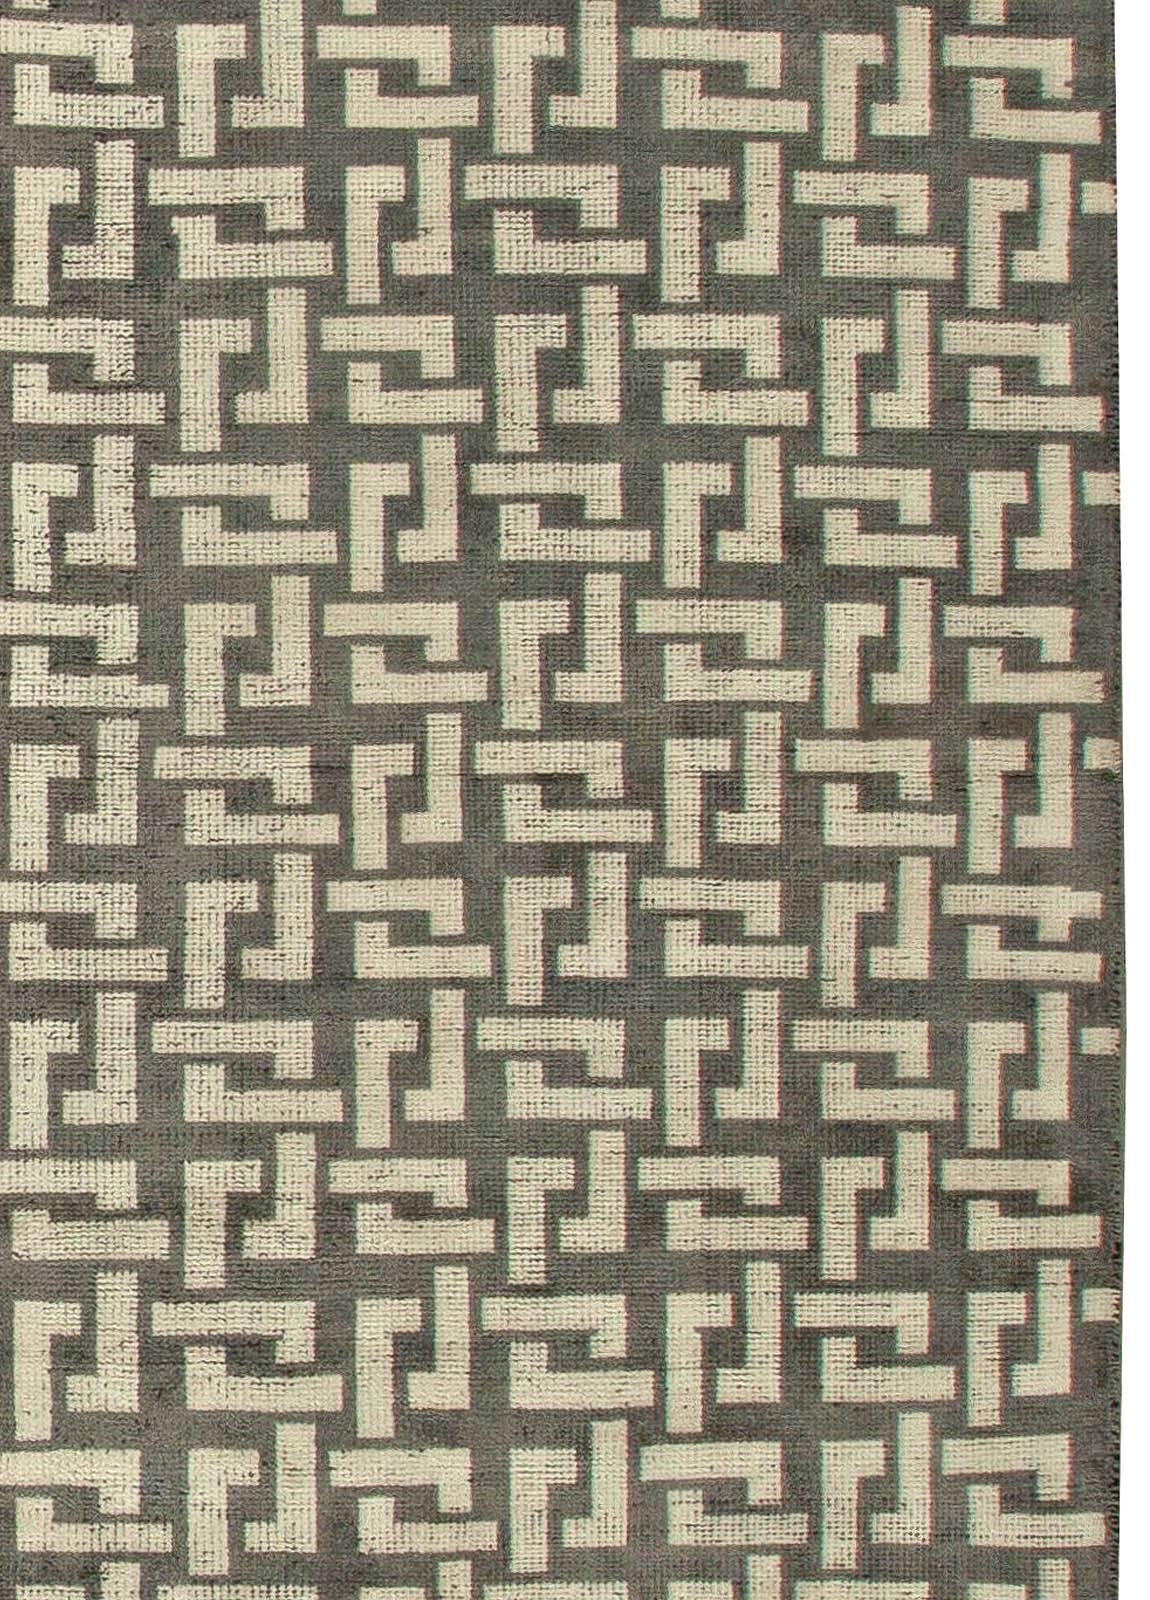 Wool Contemporary Black and White Large Modular Geometric Rug by Doris Leslie Blau For Sale